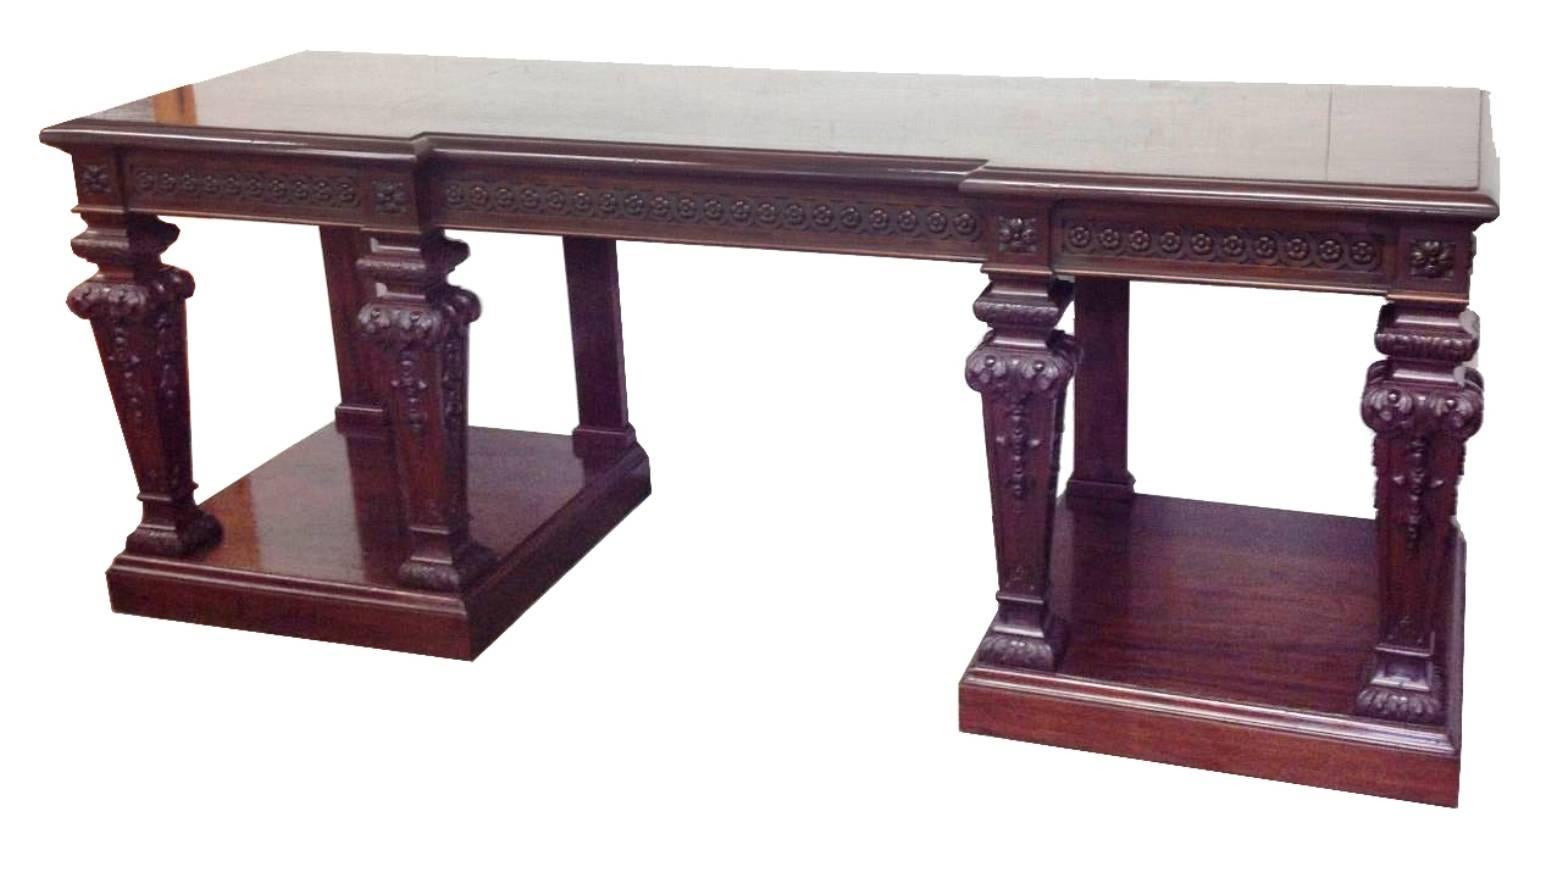 A very impressive classical 19th century mahogany console table, stamped 'Holland and Son'. Having carved paterae to the frieze, square tapering legs set on plinth bases. 
Provenience: 'The Grand Hotel' Brighton.
(A pair to this table is available.)